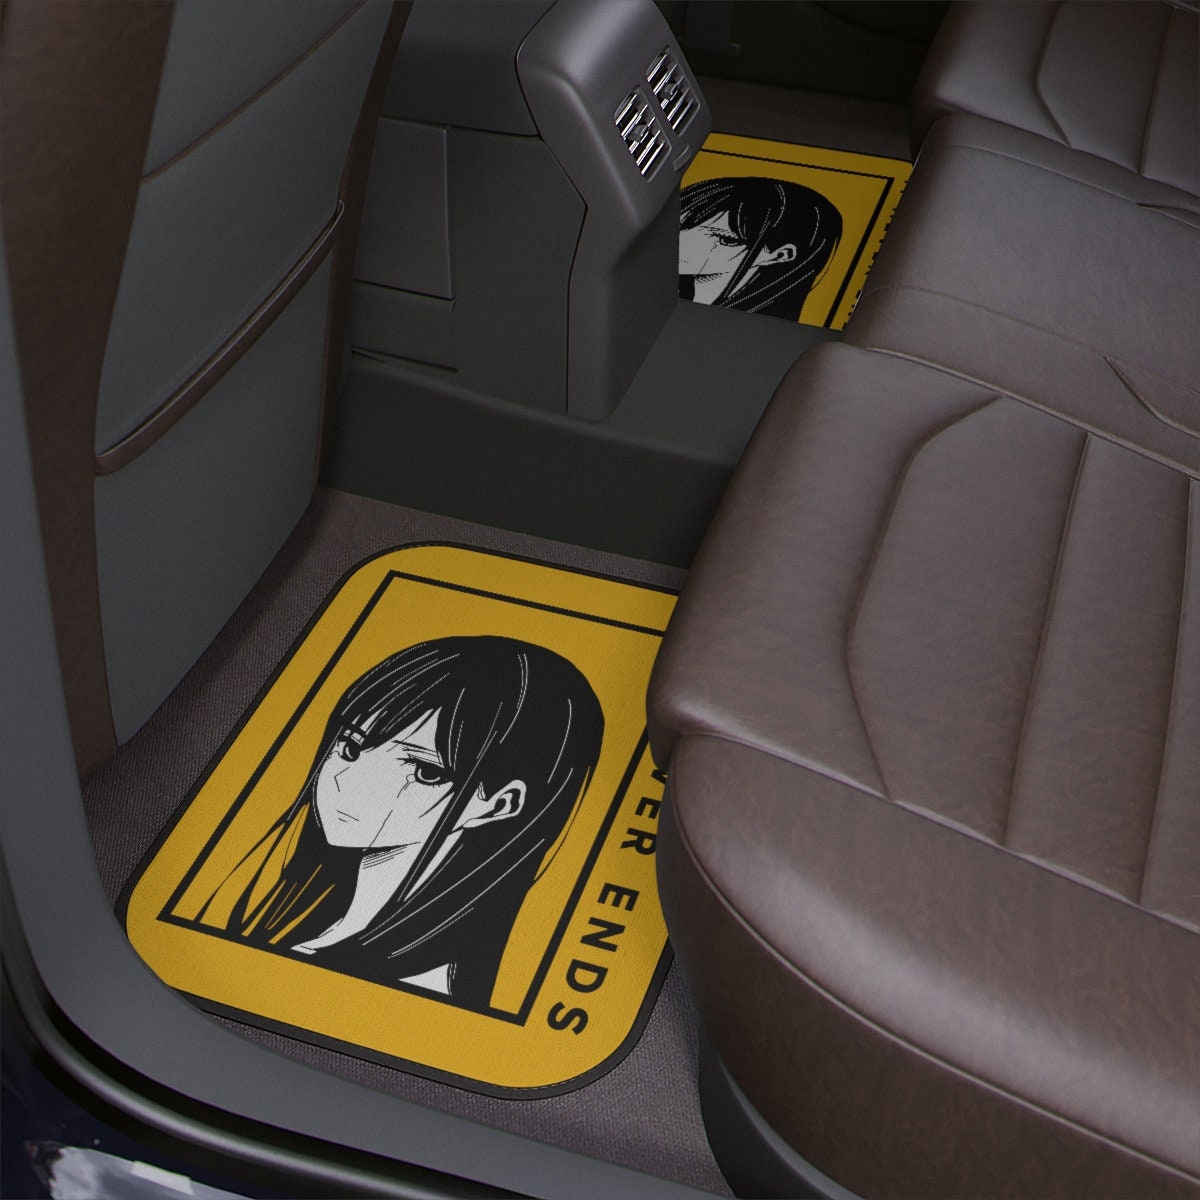 Anime Car accessories Anime girl Car Seat Covers for Car, Black